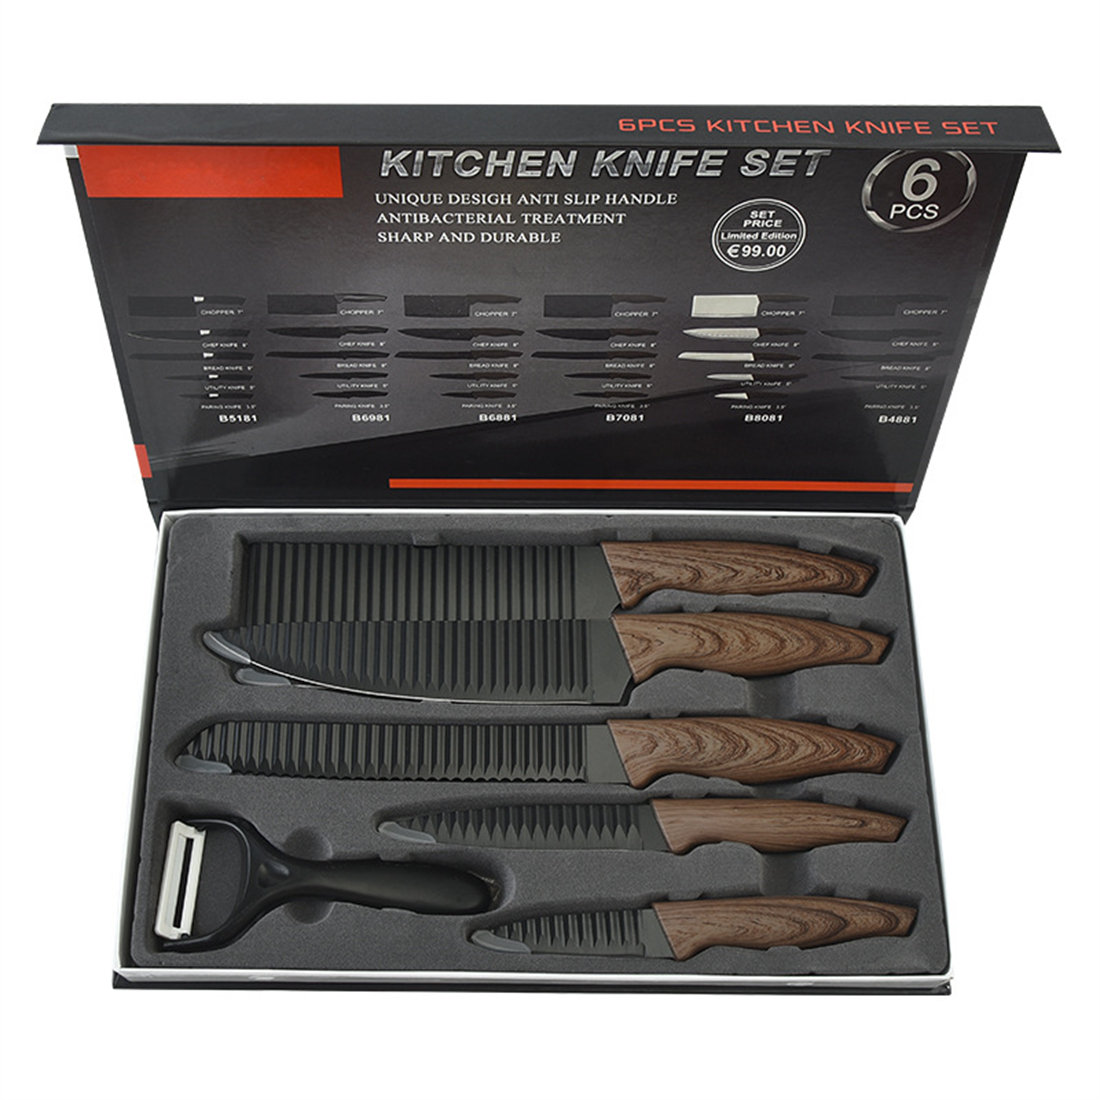 6PCS Kitchen Knife Set in Box, Chef Knife, Cleaver Knife, Carving